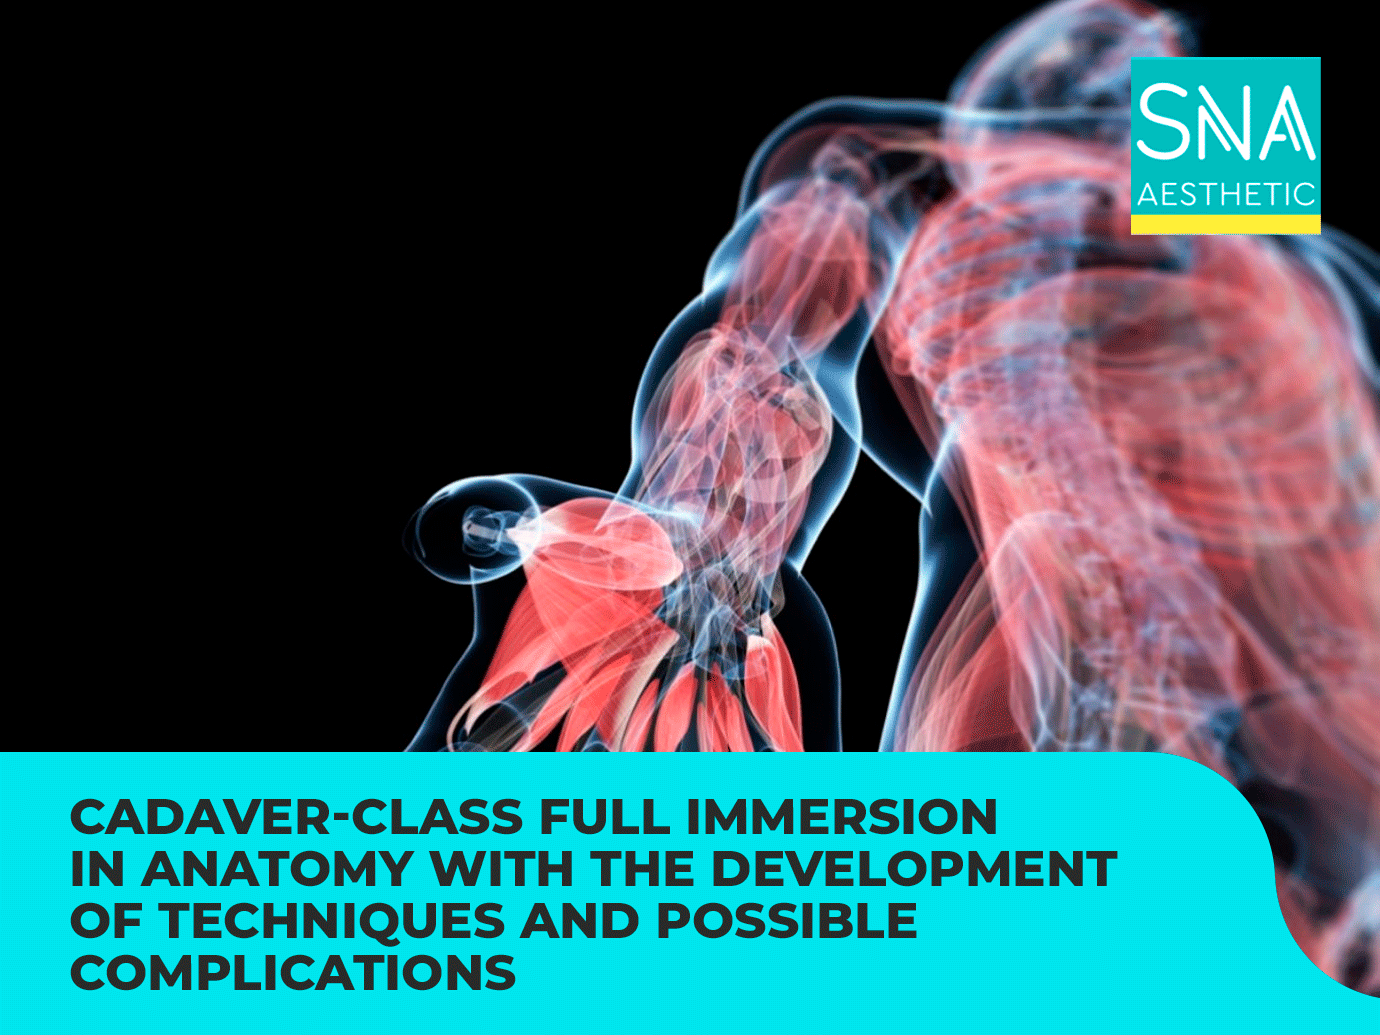 CADAVER-CLASS Full immersion in anatomy with the development of techniques and possible complications